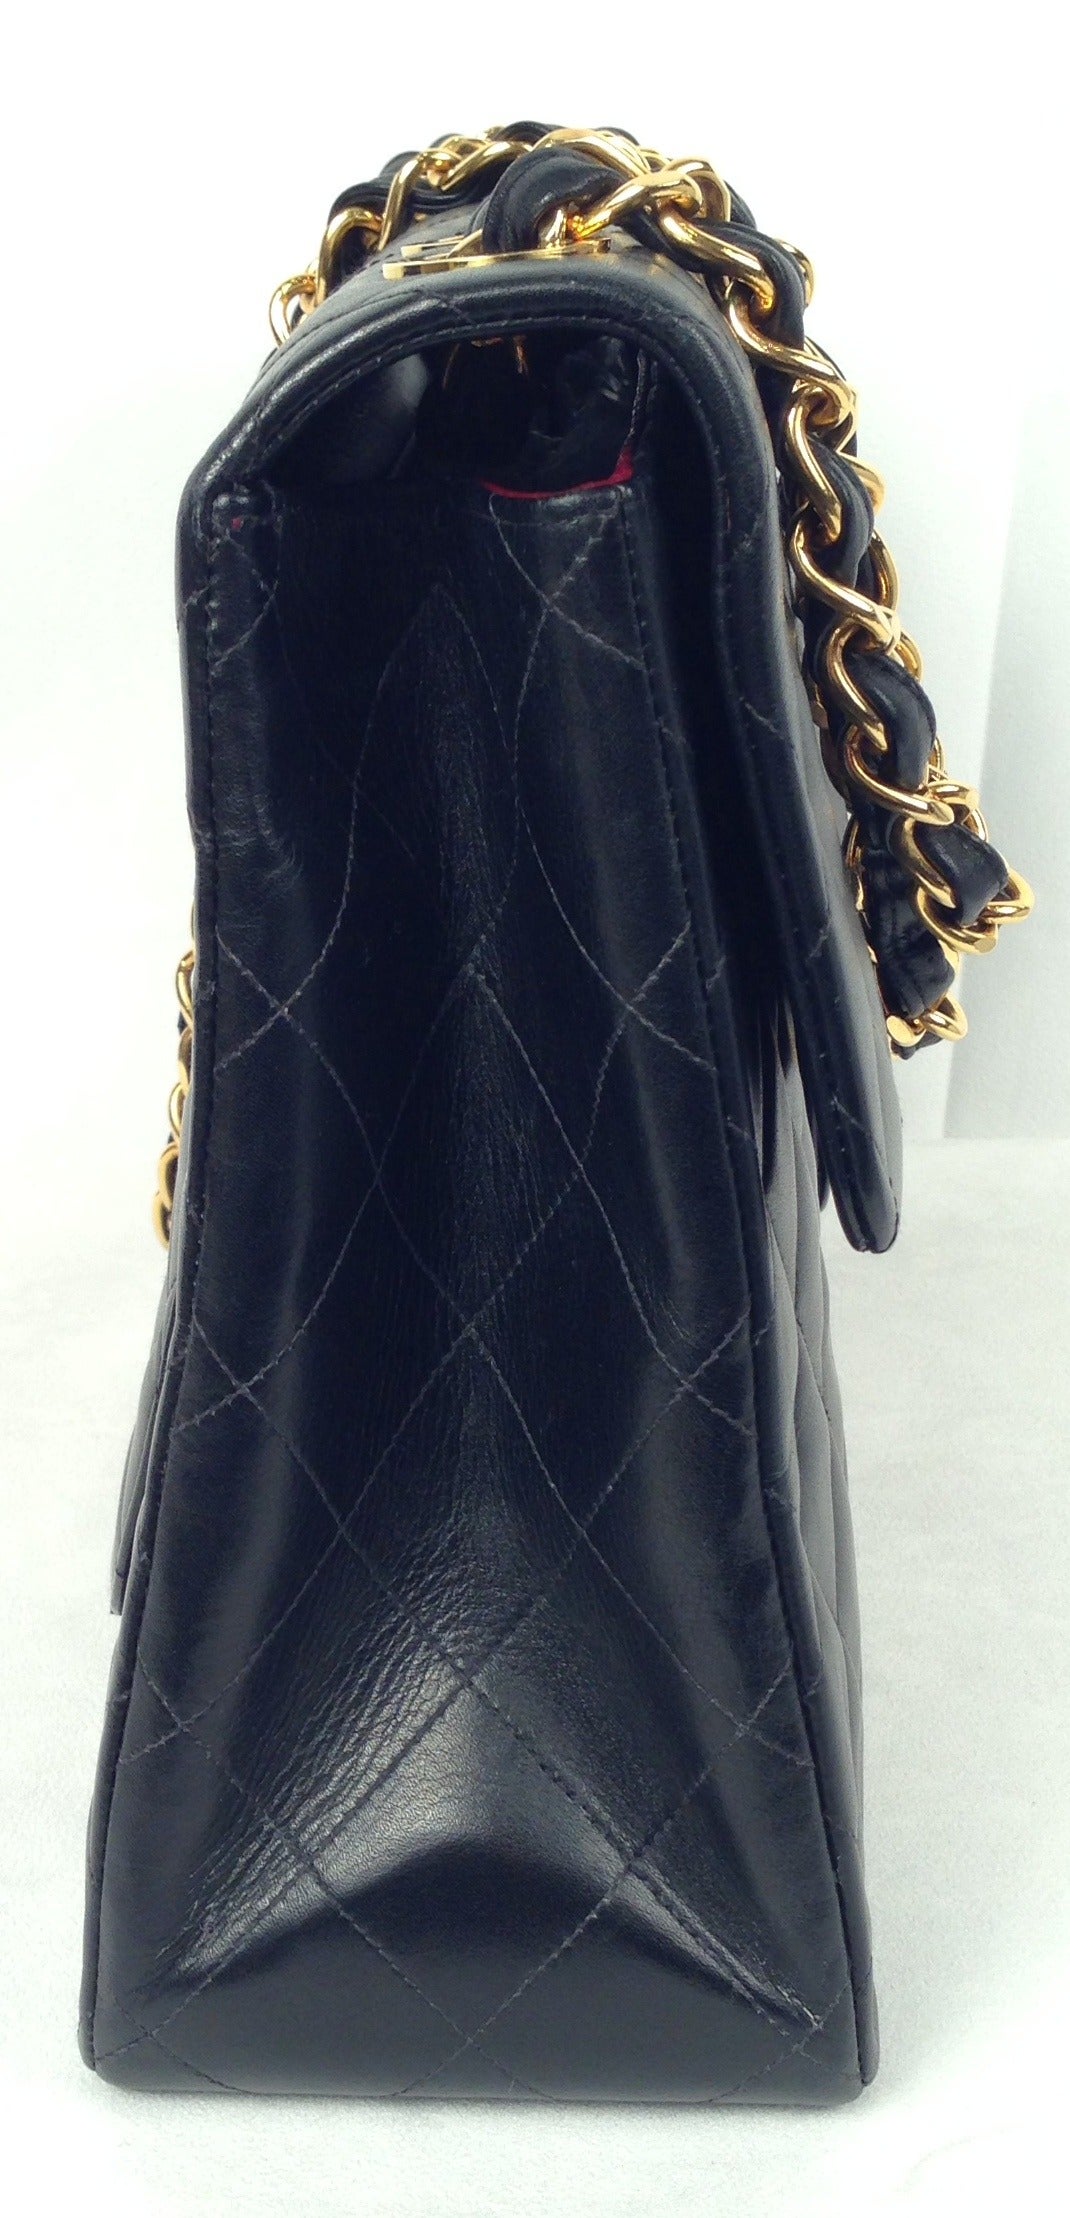 1990s Chanel Maxi Classic Quilted Single Flap Bag No. 3160136 In Excellent Condition For Sale In Palm Beach, FL